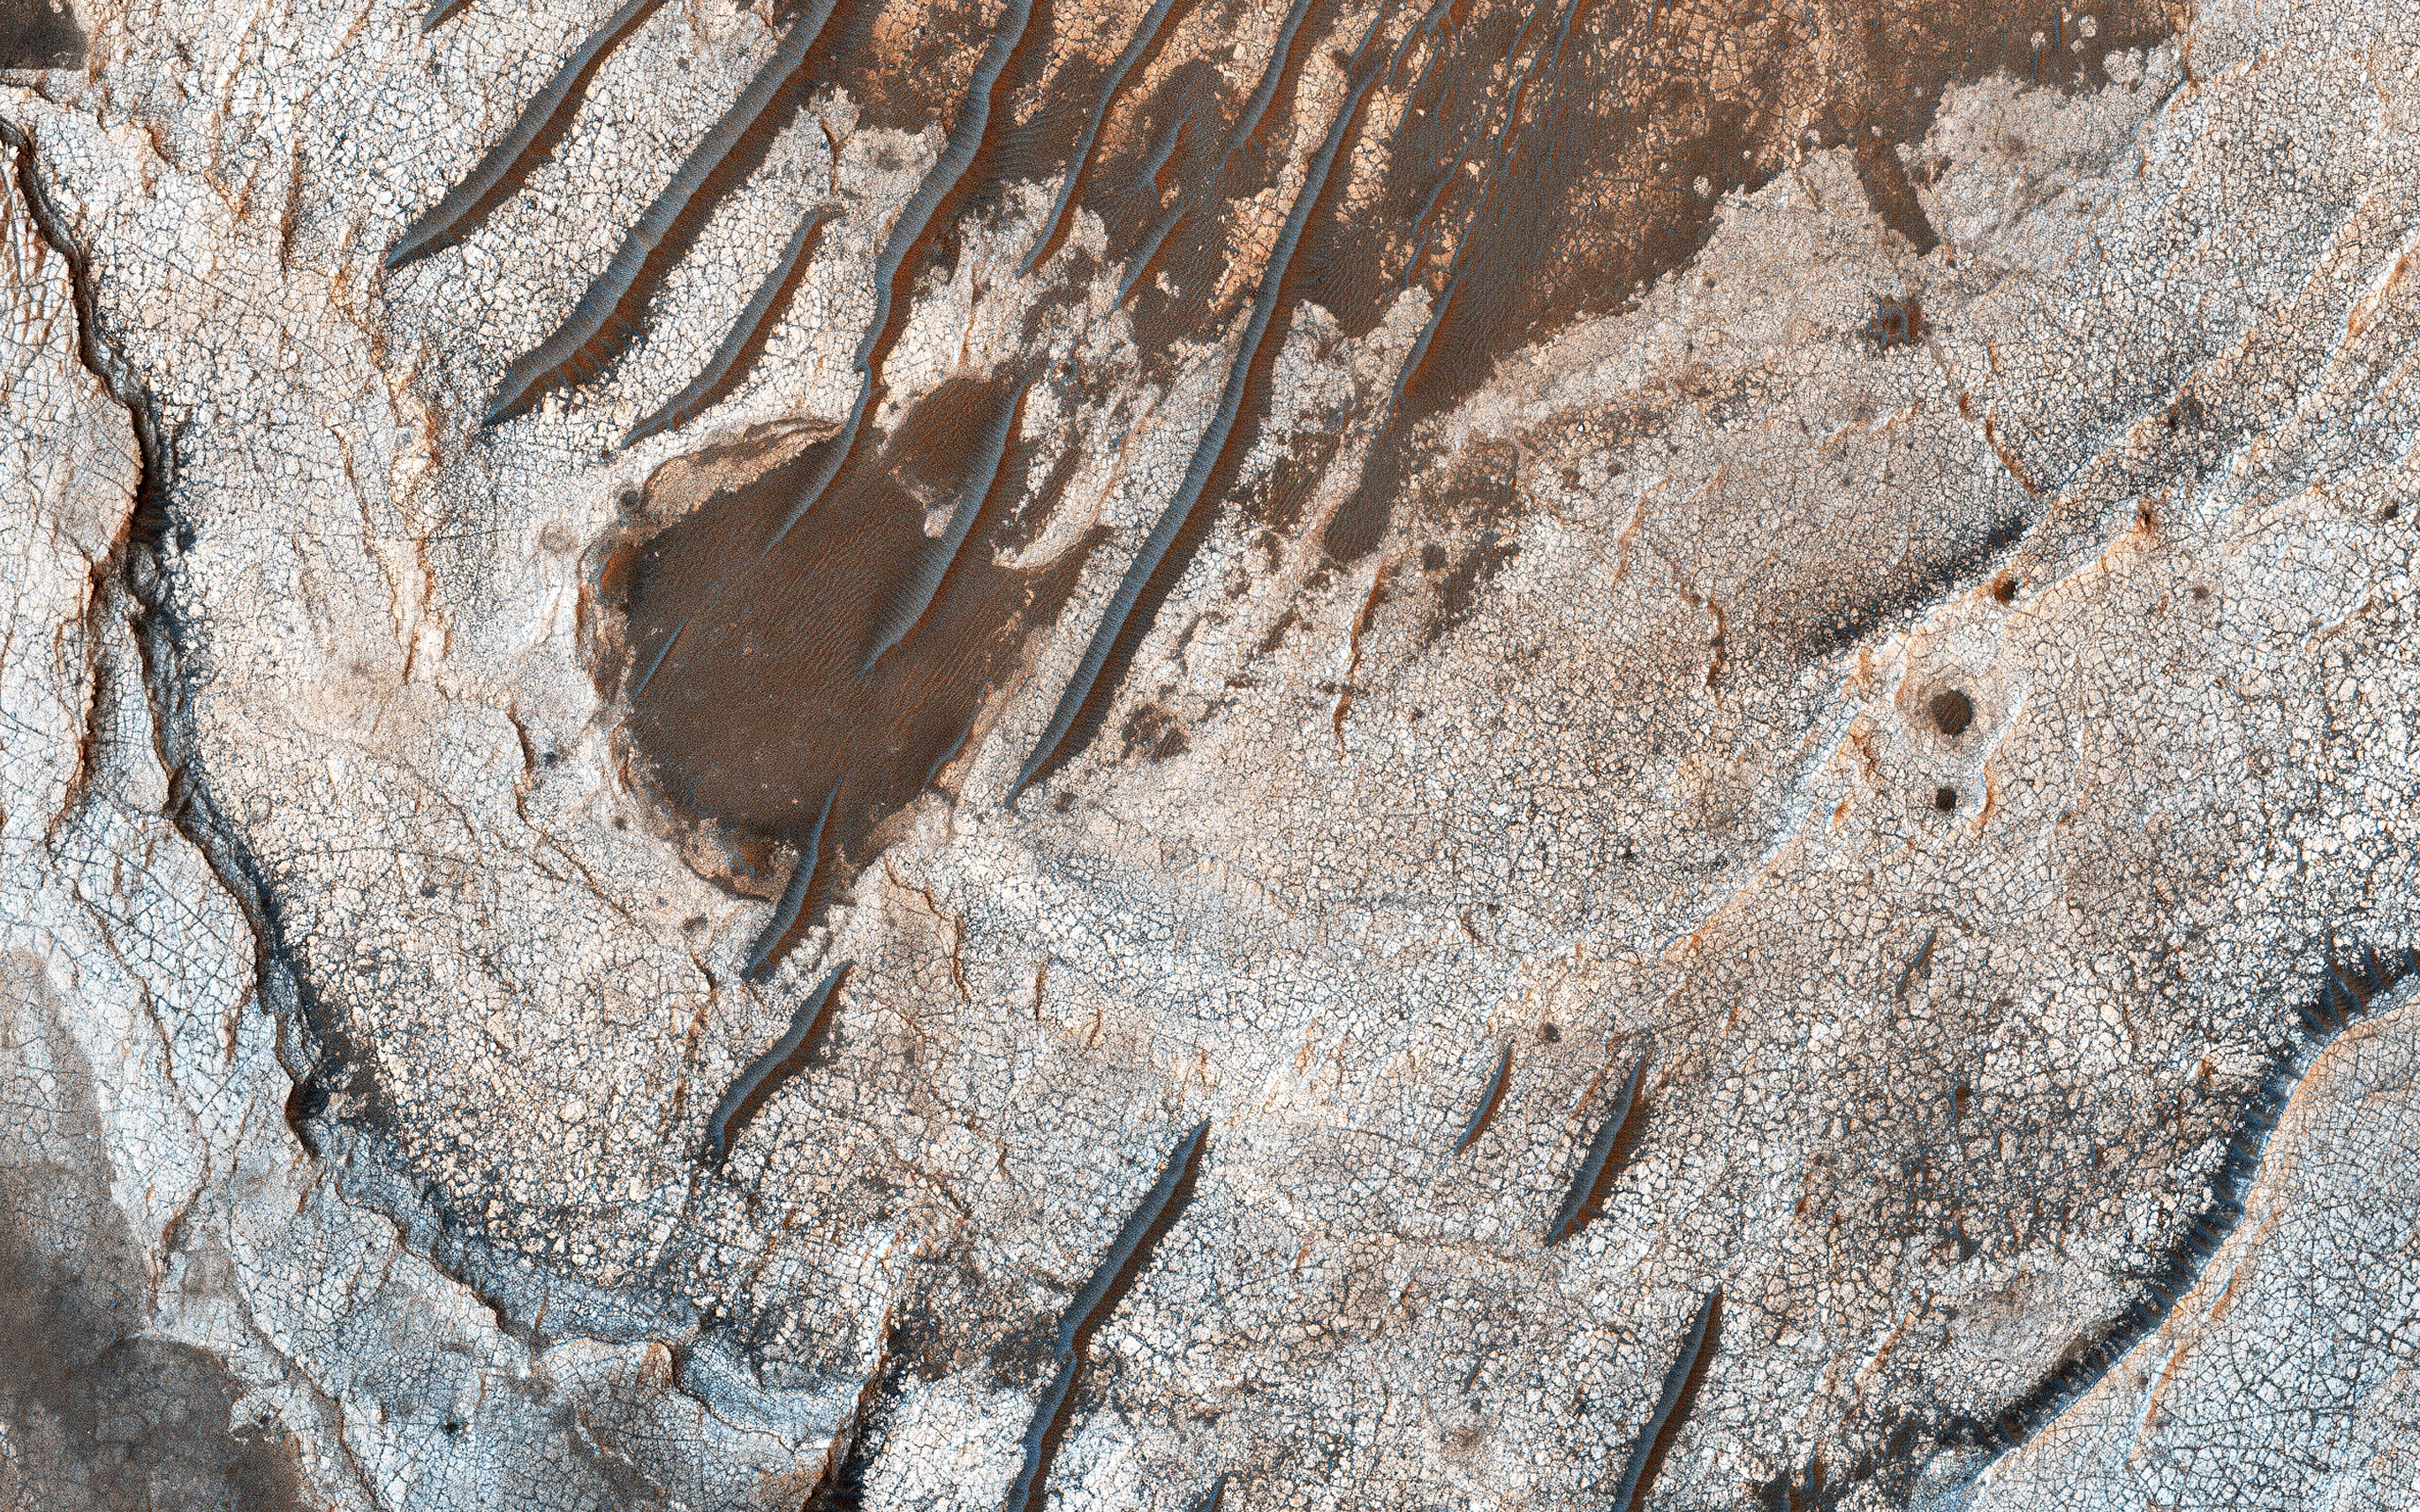 This image acquired on December 8, 2018 by NASAs Mars Reconnaissance Orbiter, shows erosion of the surface revealing several shades of light toned layers, likely sedimentary deposits.